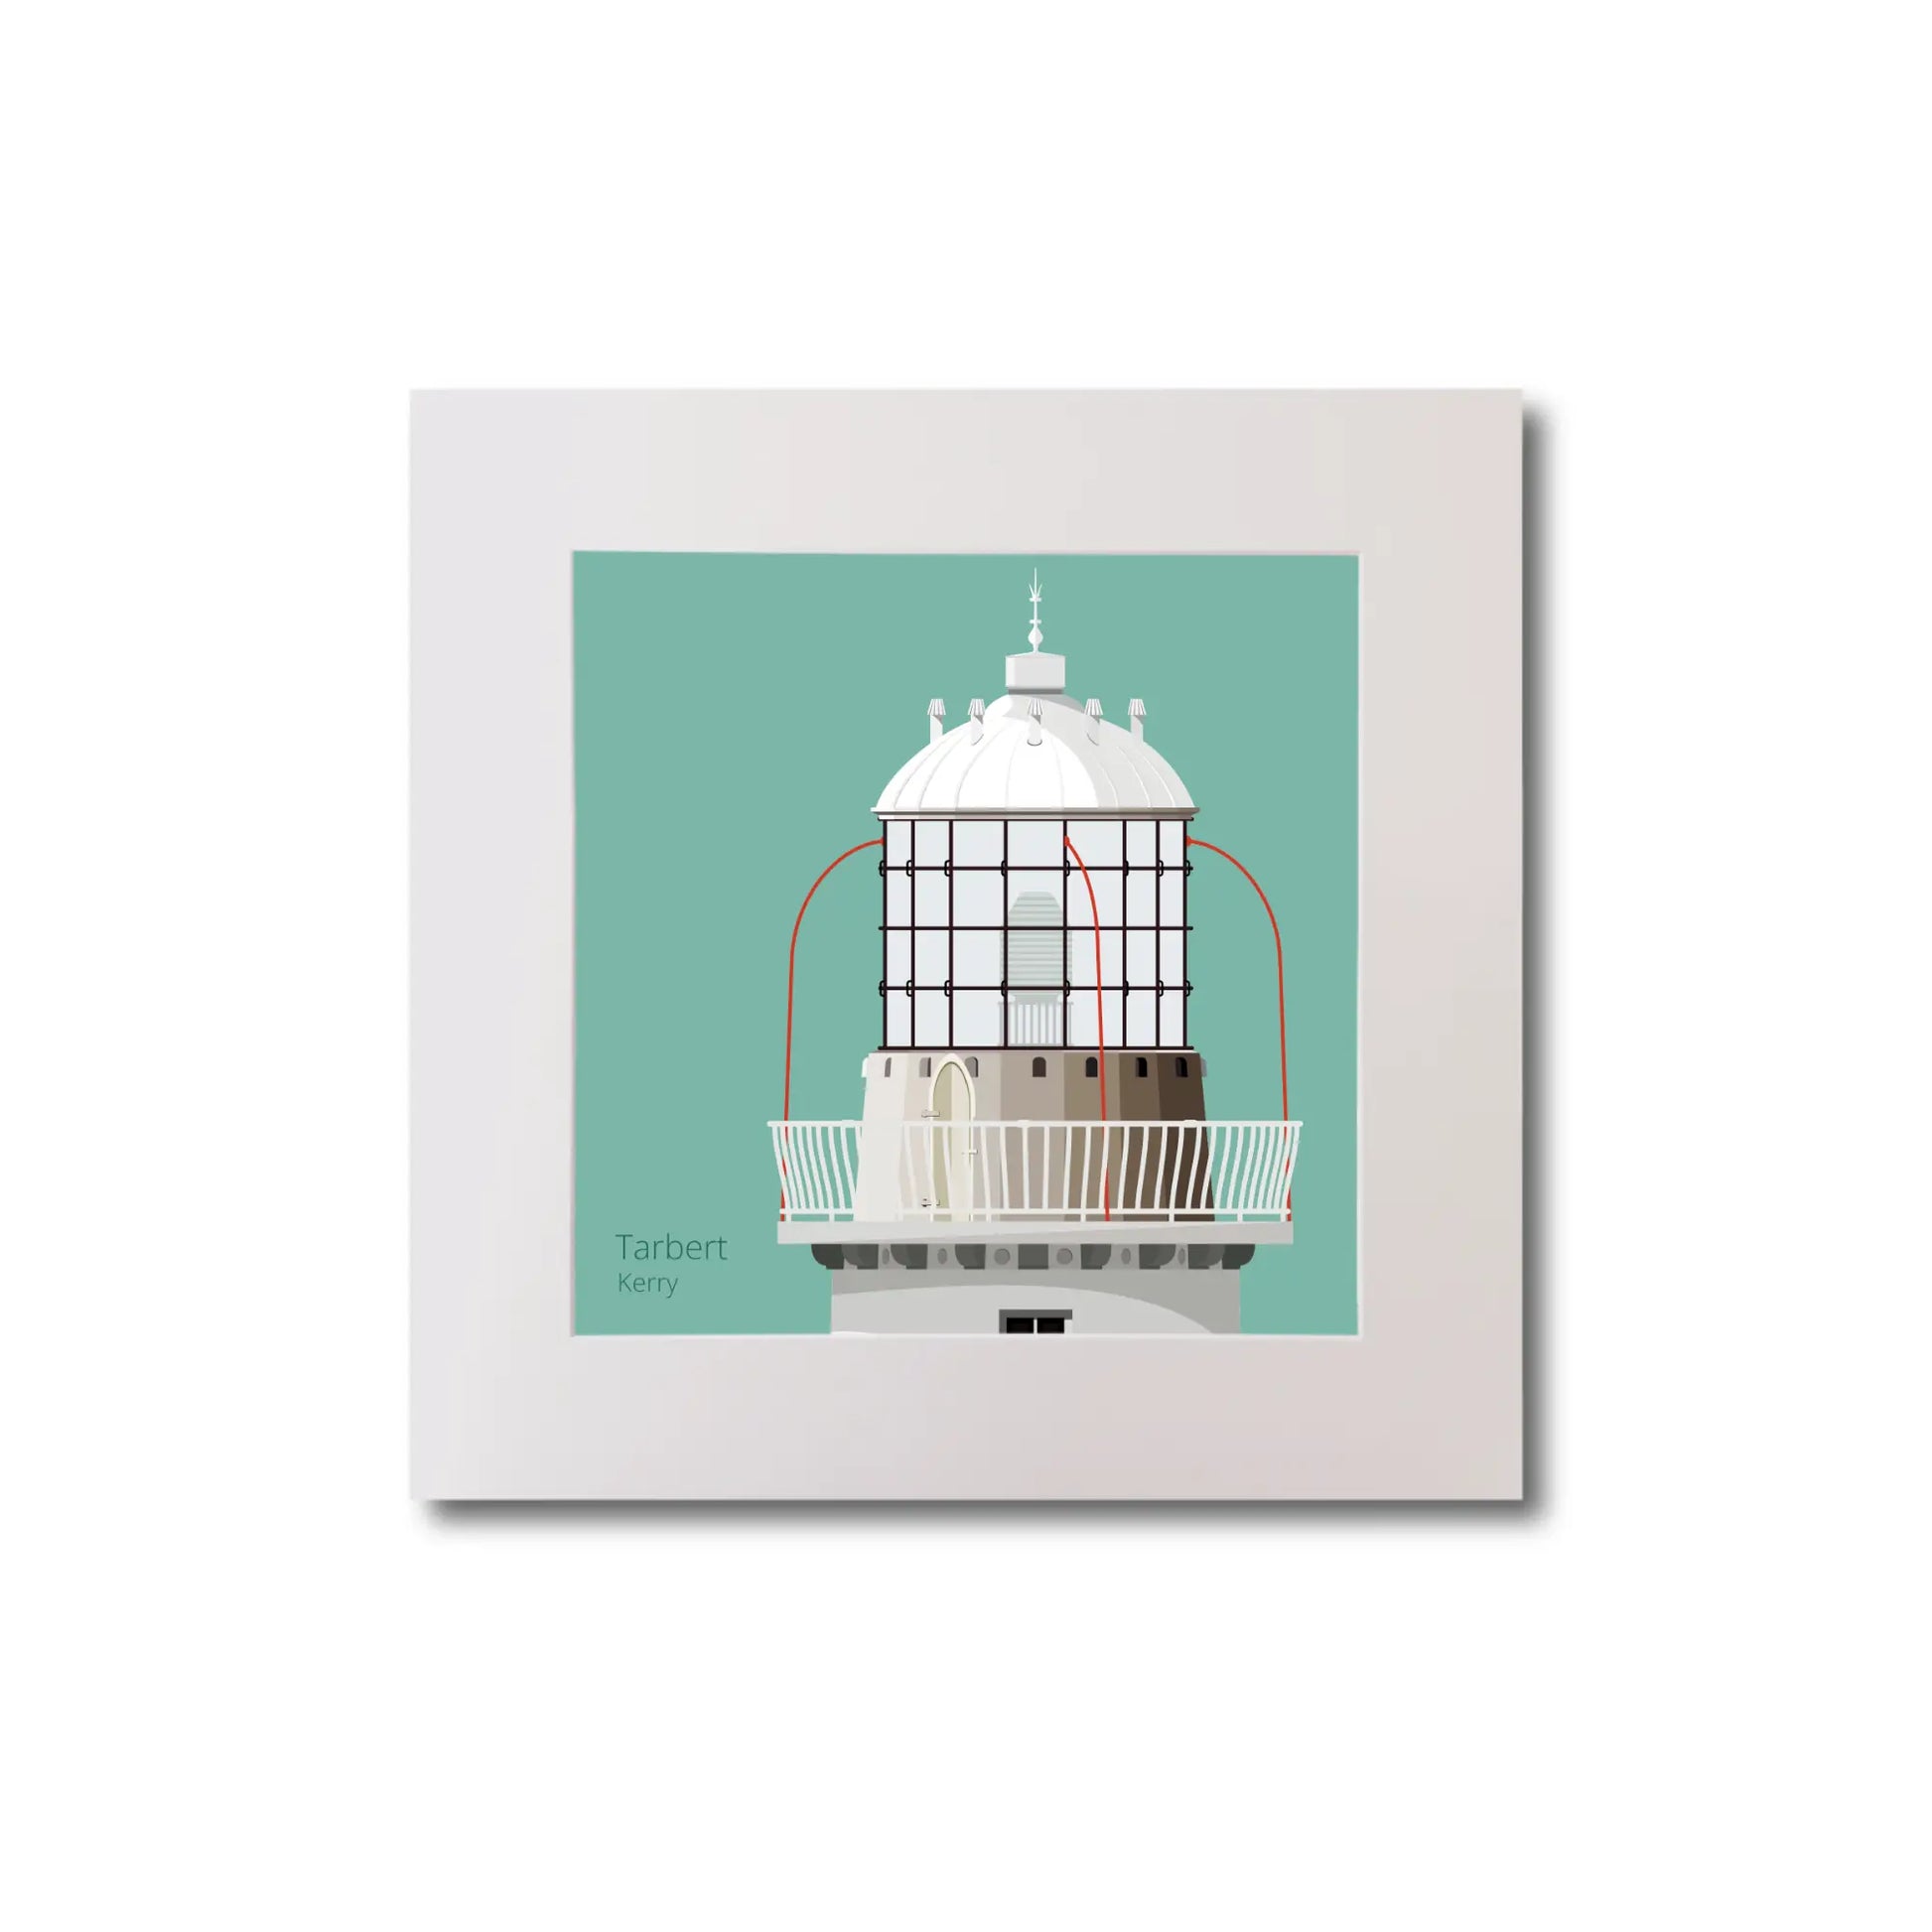 Illustration Tarbert lighthouse on an ocean green background, mounted and measuring 20x20cm.